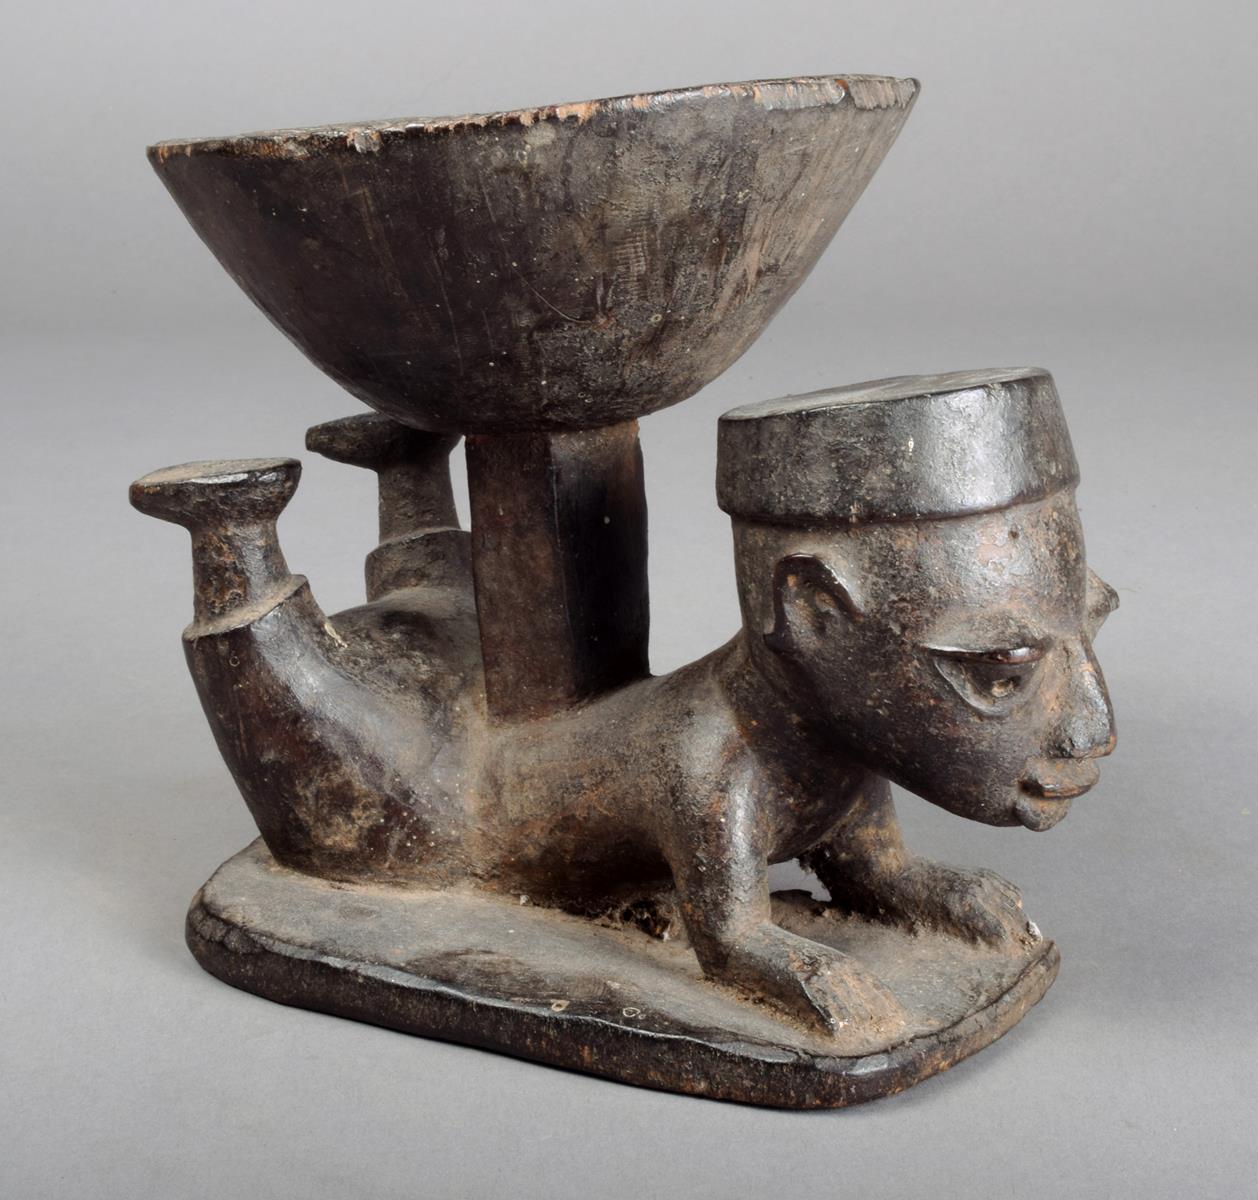 A Yoruba divination bowl Nigeria with an incised edge and supported by an acrobatic figure 14.5cm